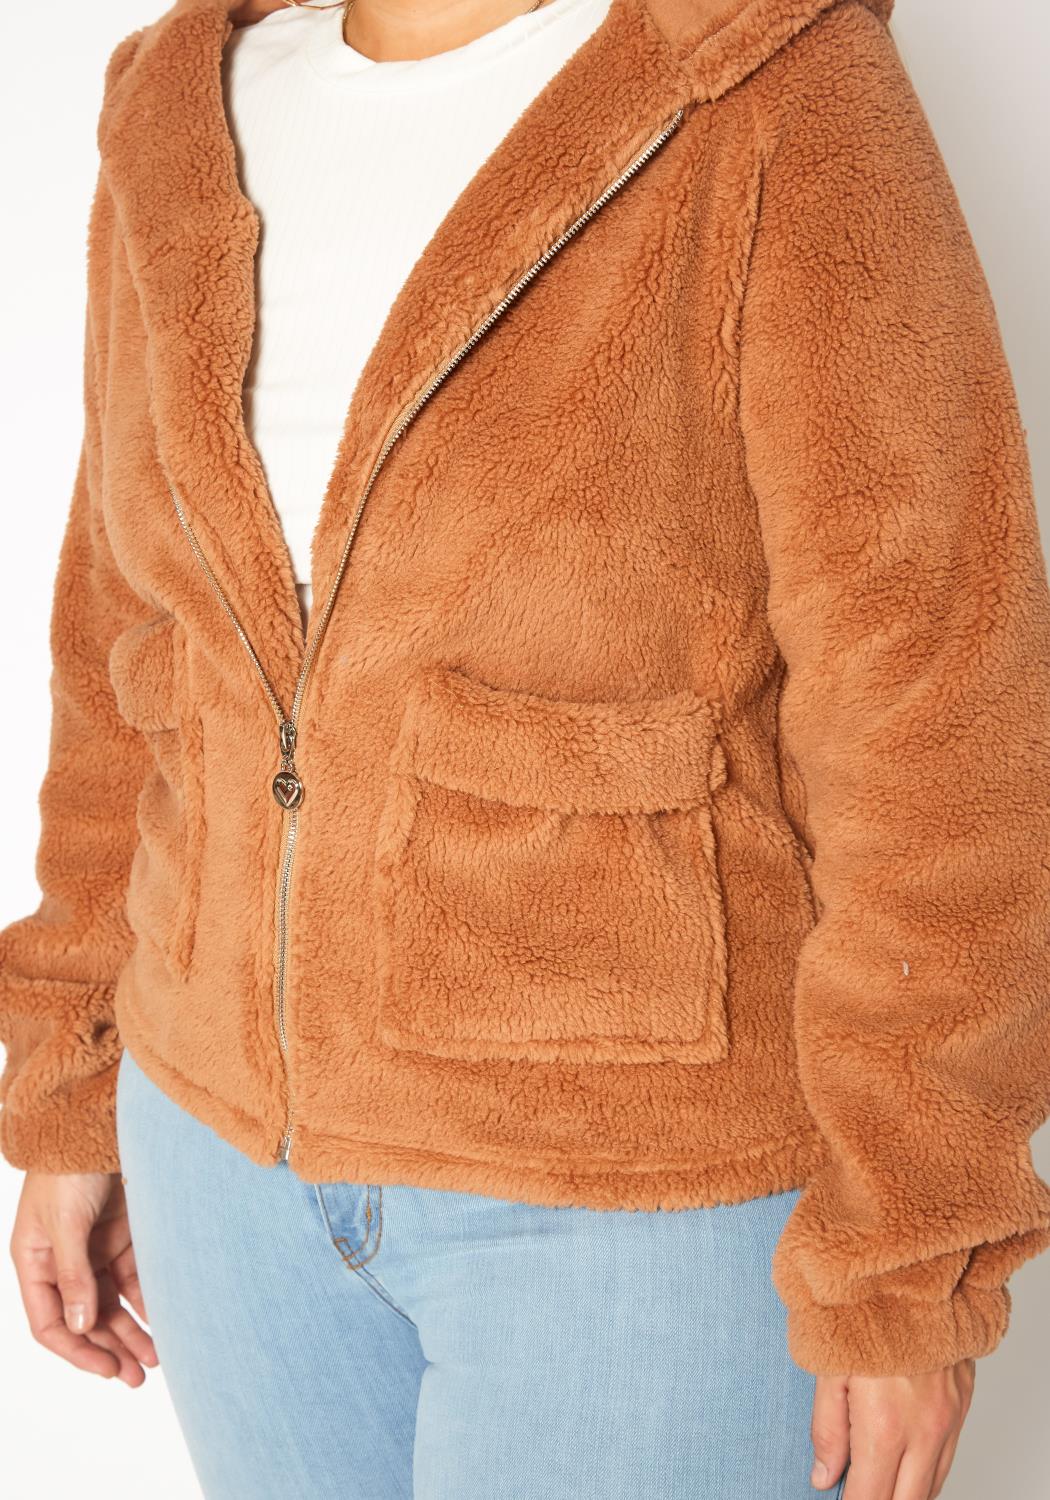 HI Curvy Plus Size Women  Faux Fur Hooded Zip Front Sweater Jacket with Pockets